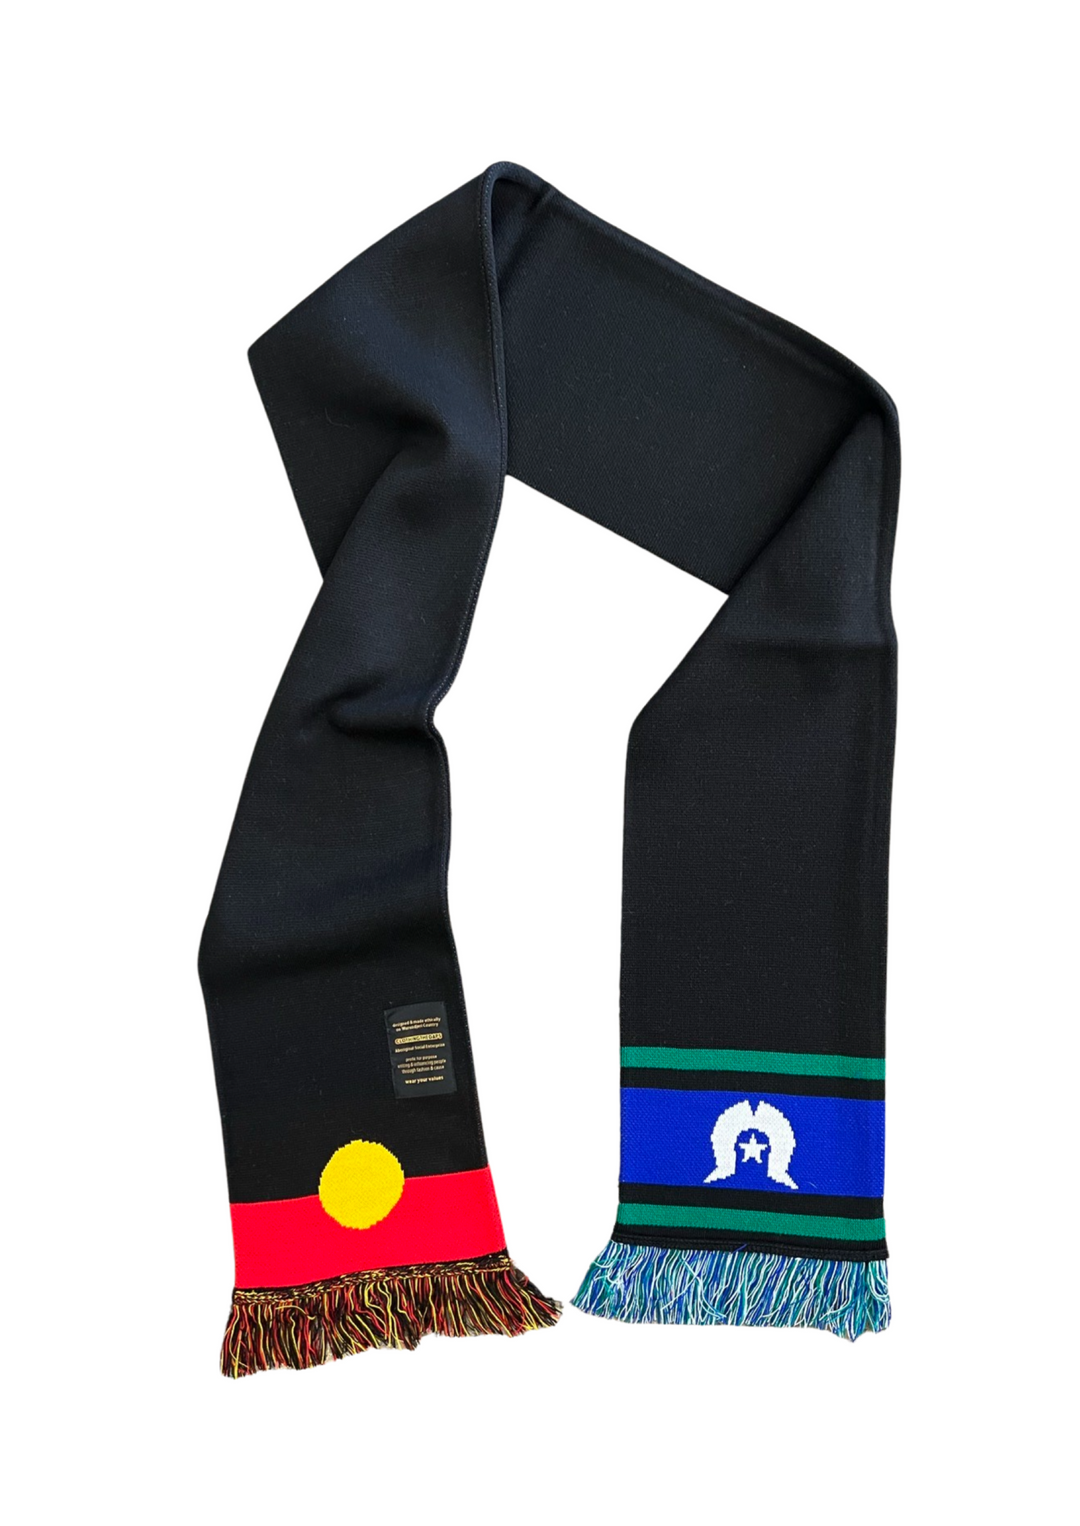 Clothing The Gaps. Represent Scarf. Thick black long scarf with aboriginal flag at one ends and Torres strait islander flag at other end. With red, black and yellow strings at aboriginal flag end and green, white and blue strings at end of Torres strait islender flag end. 